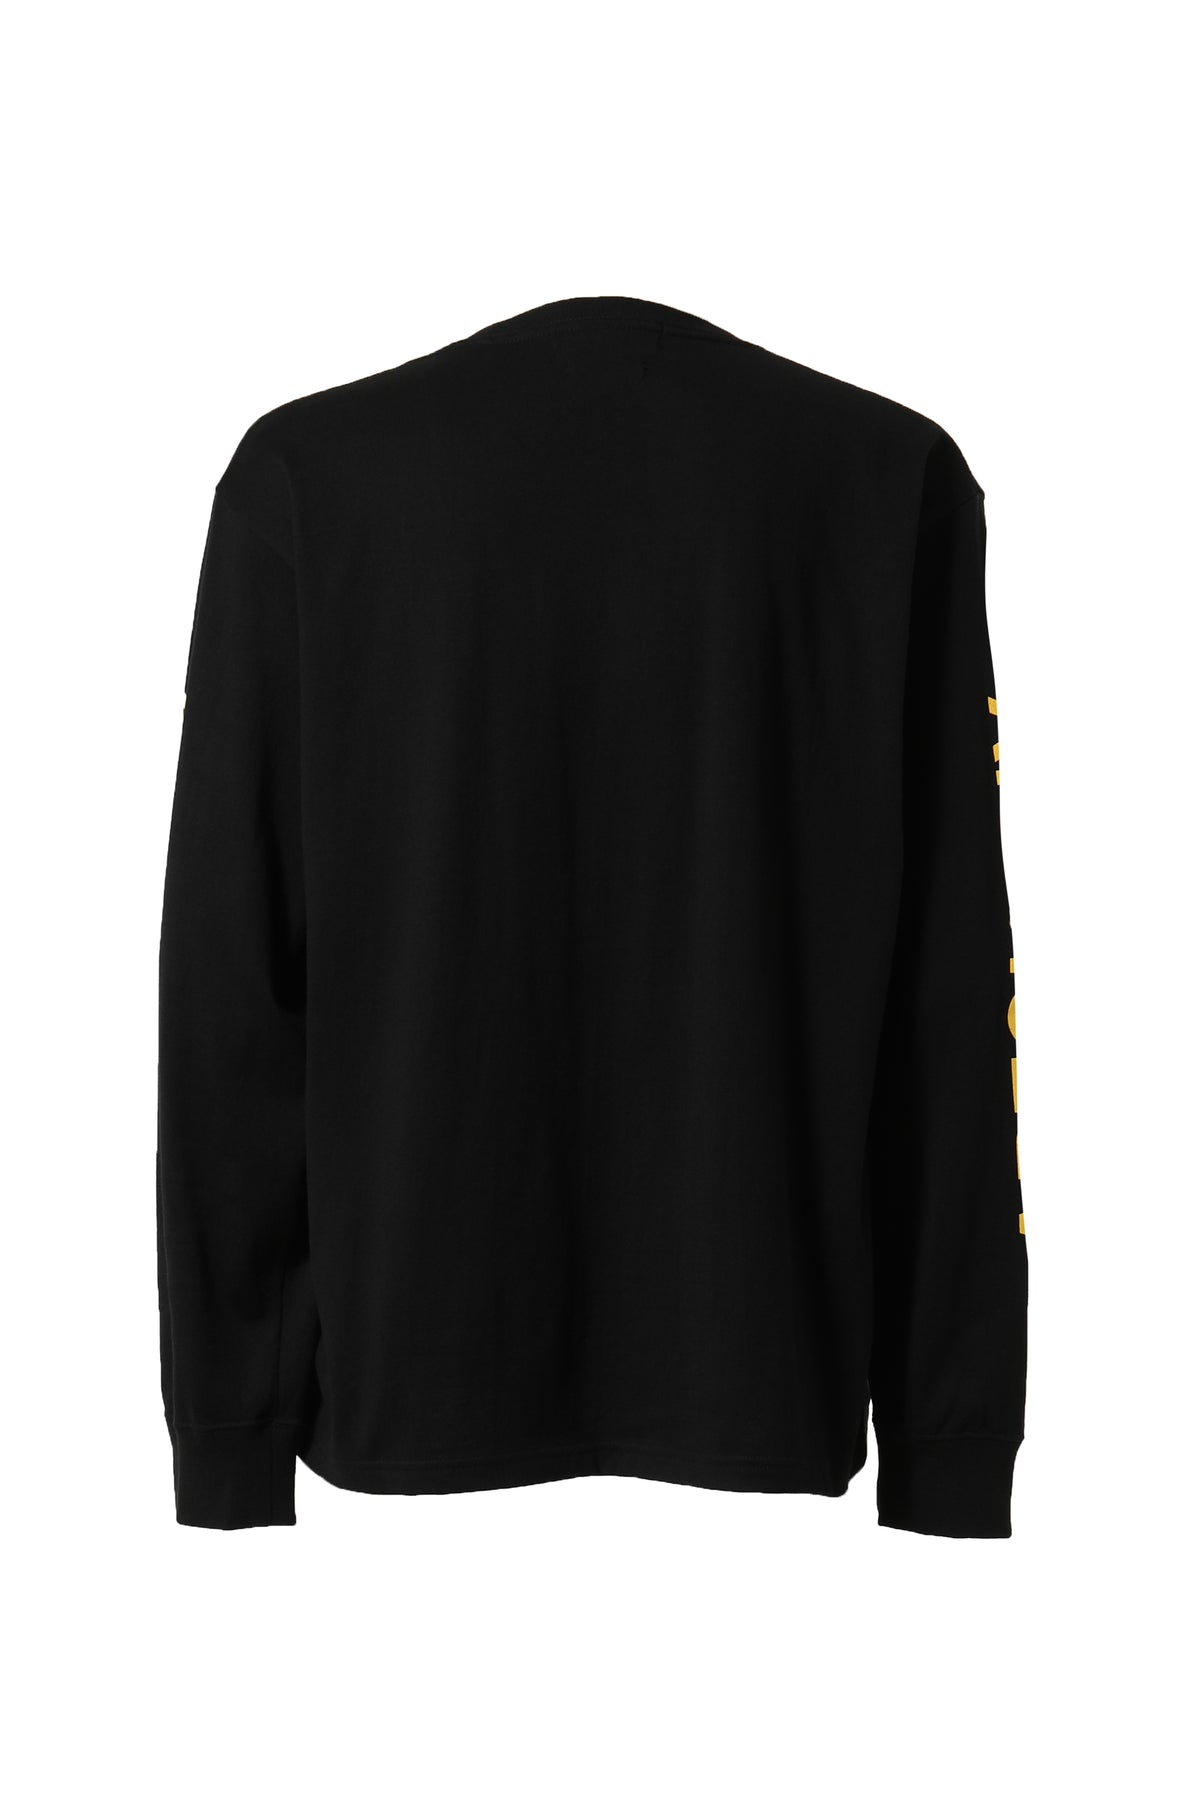 ARTCHENY DOUBLE CIRCLE LONG SLEEVE TEE / BLK